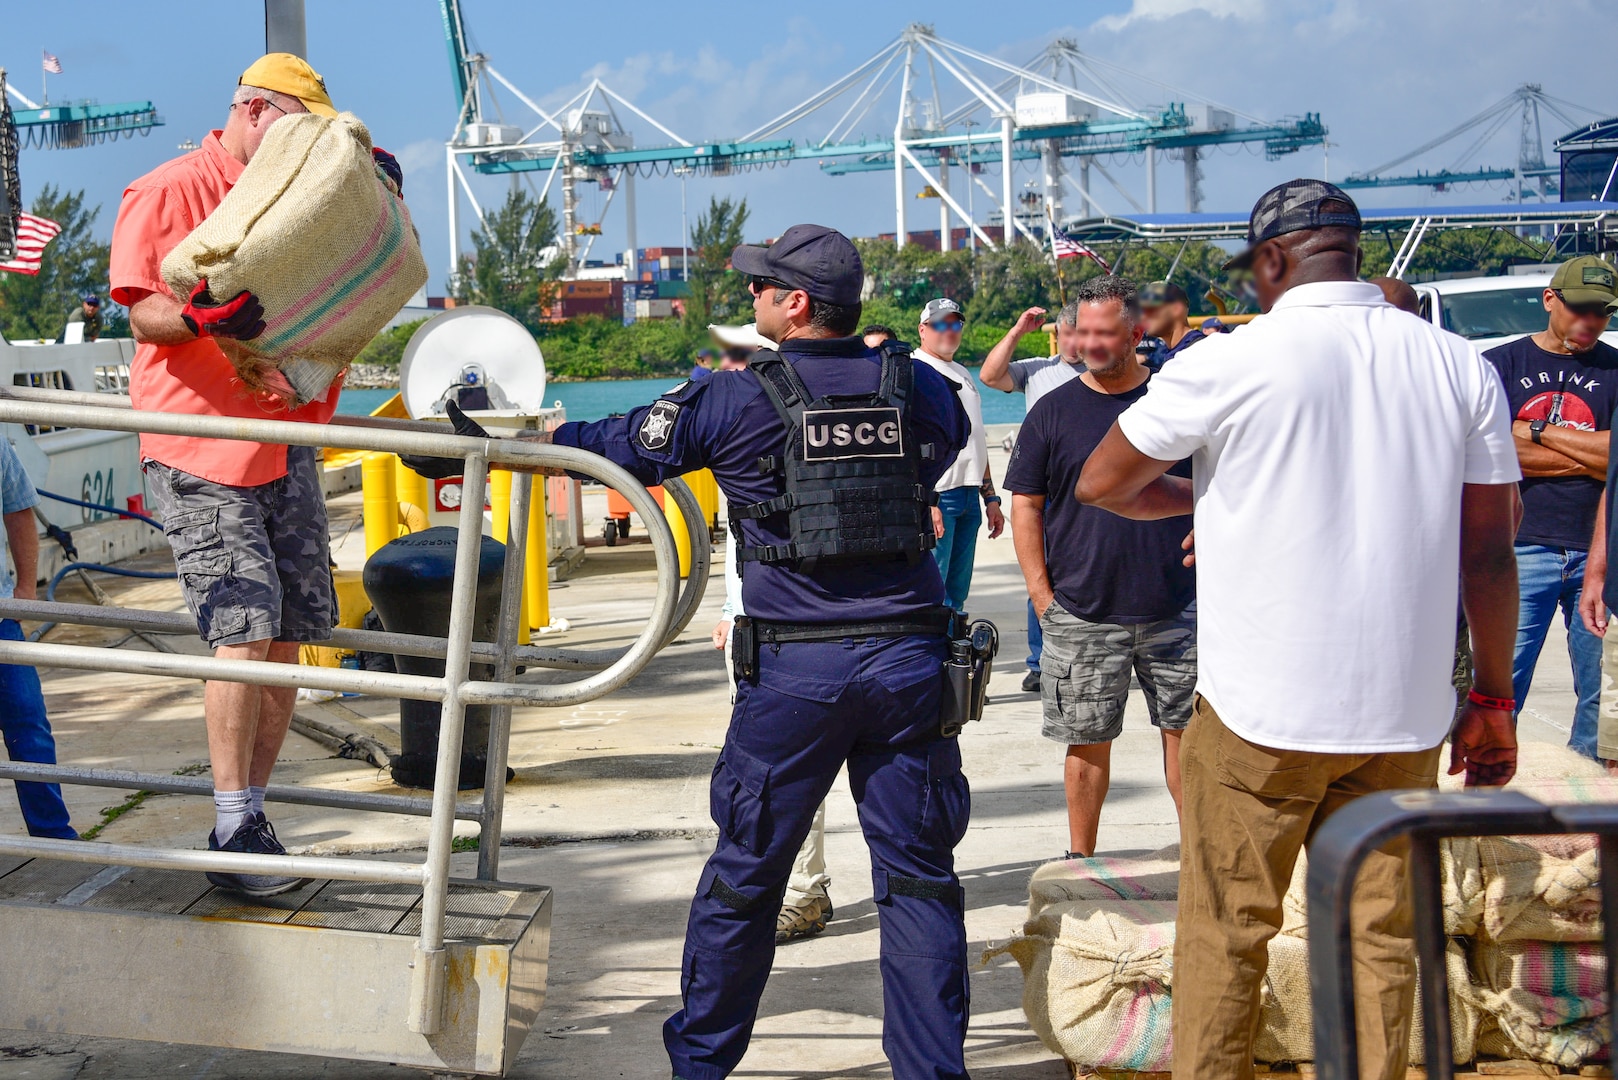 U.S. Coast Guard Cutter Dauntless' (WMEC-624) crewmembers offload bales of illegal narcotics on to pallet at Base Miami Beach, Florida, April 1, 2022